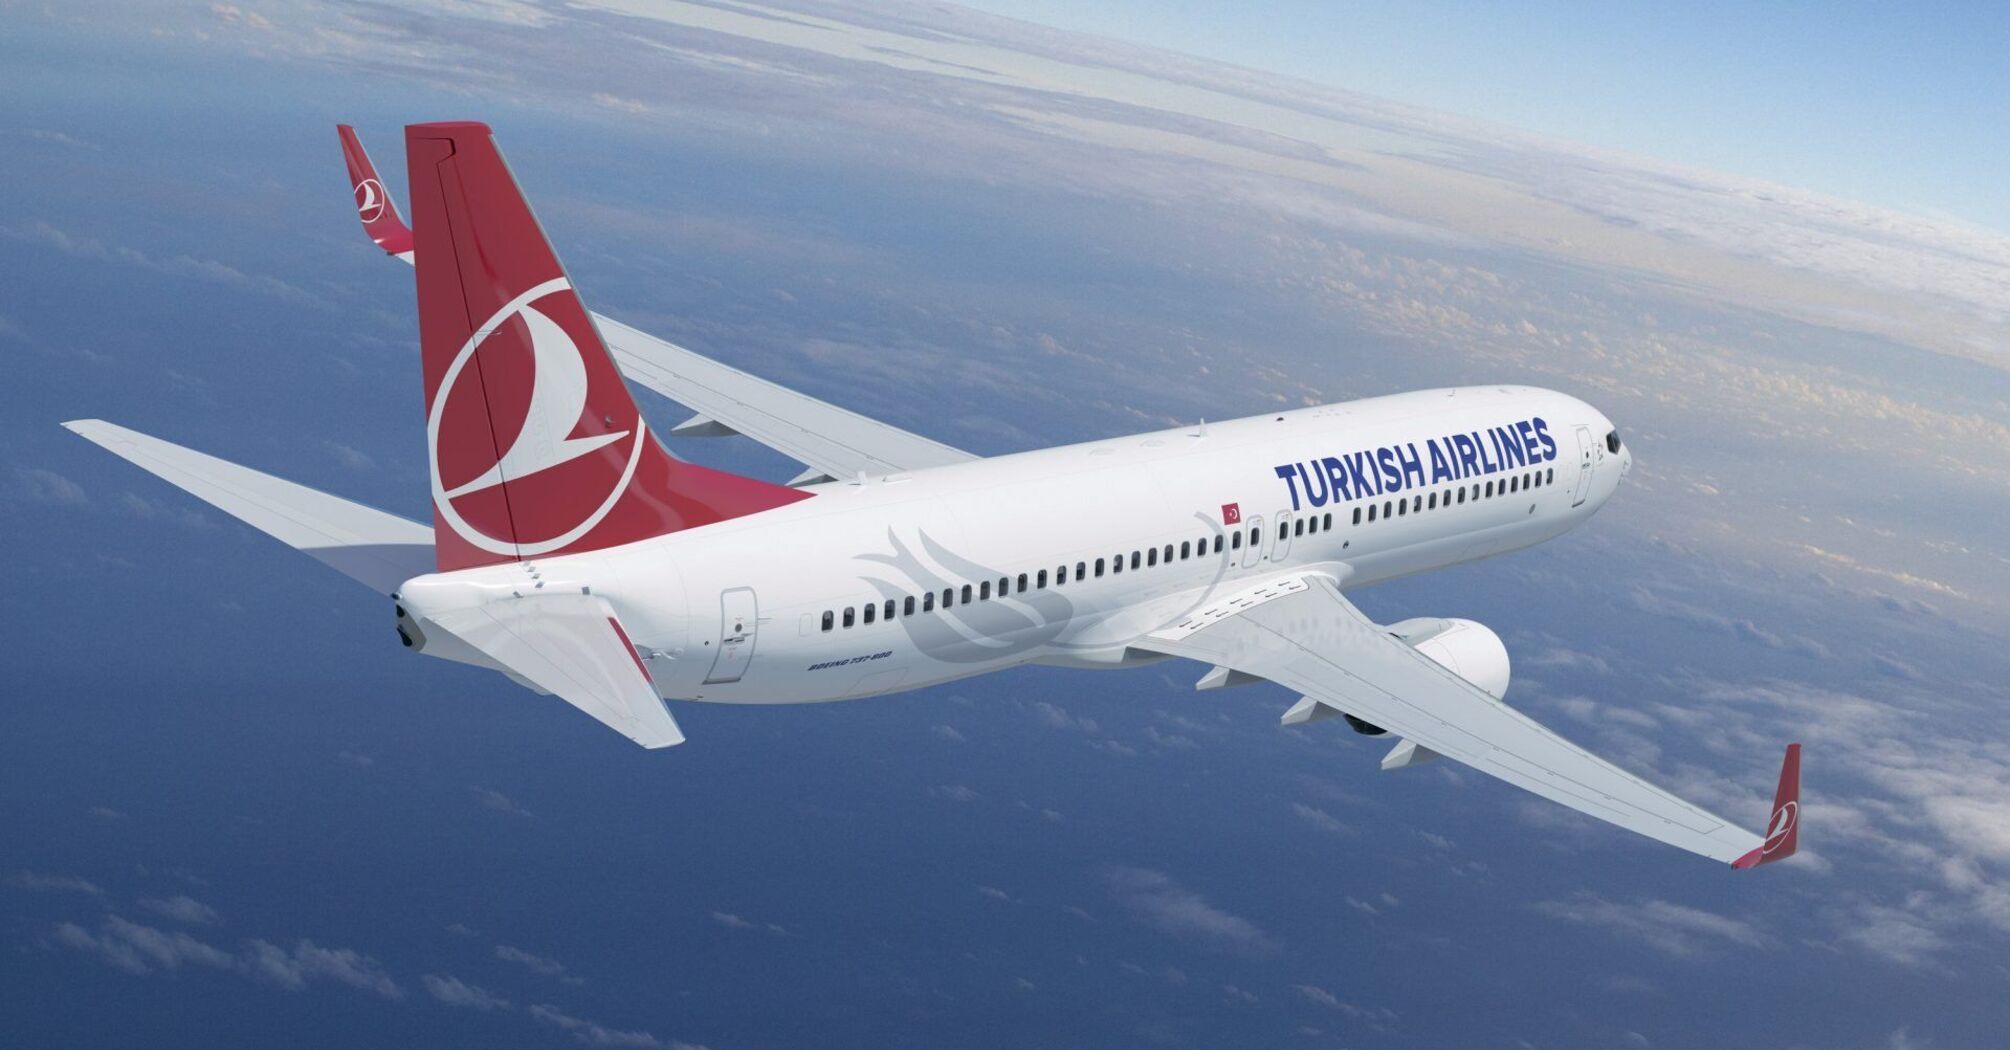 The Turkish Airlines aircraft